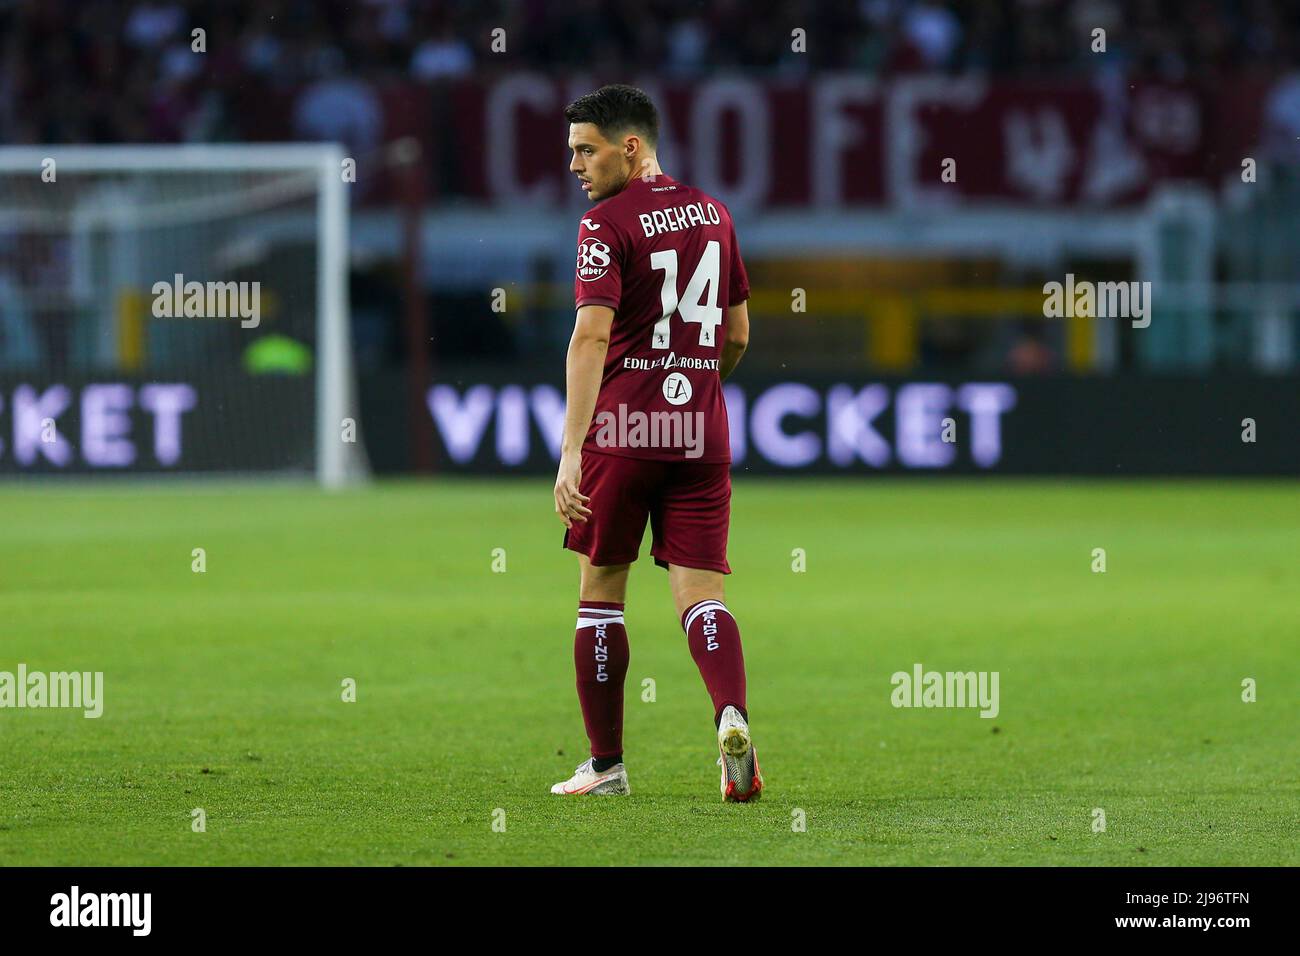 Turin, Italy. 20th May, 2022. TURIN, ITALY, 20 MAY 2022. Josip Brekalo of Torino FC during the Serie A match between Torino FC and AS Roma on may 20, 2002 at Olympic Grande Torino Stadium. Credit: Medialys Images by Massimiliano Ferraro/Alamy Live News Stock Photo